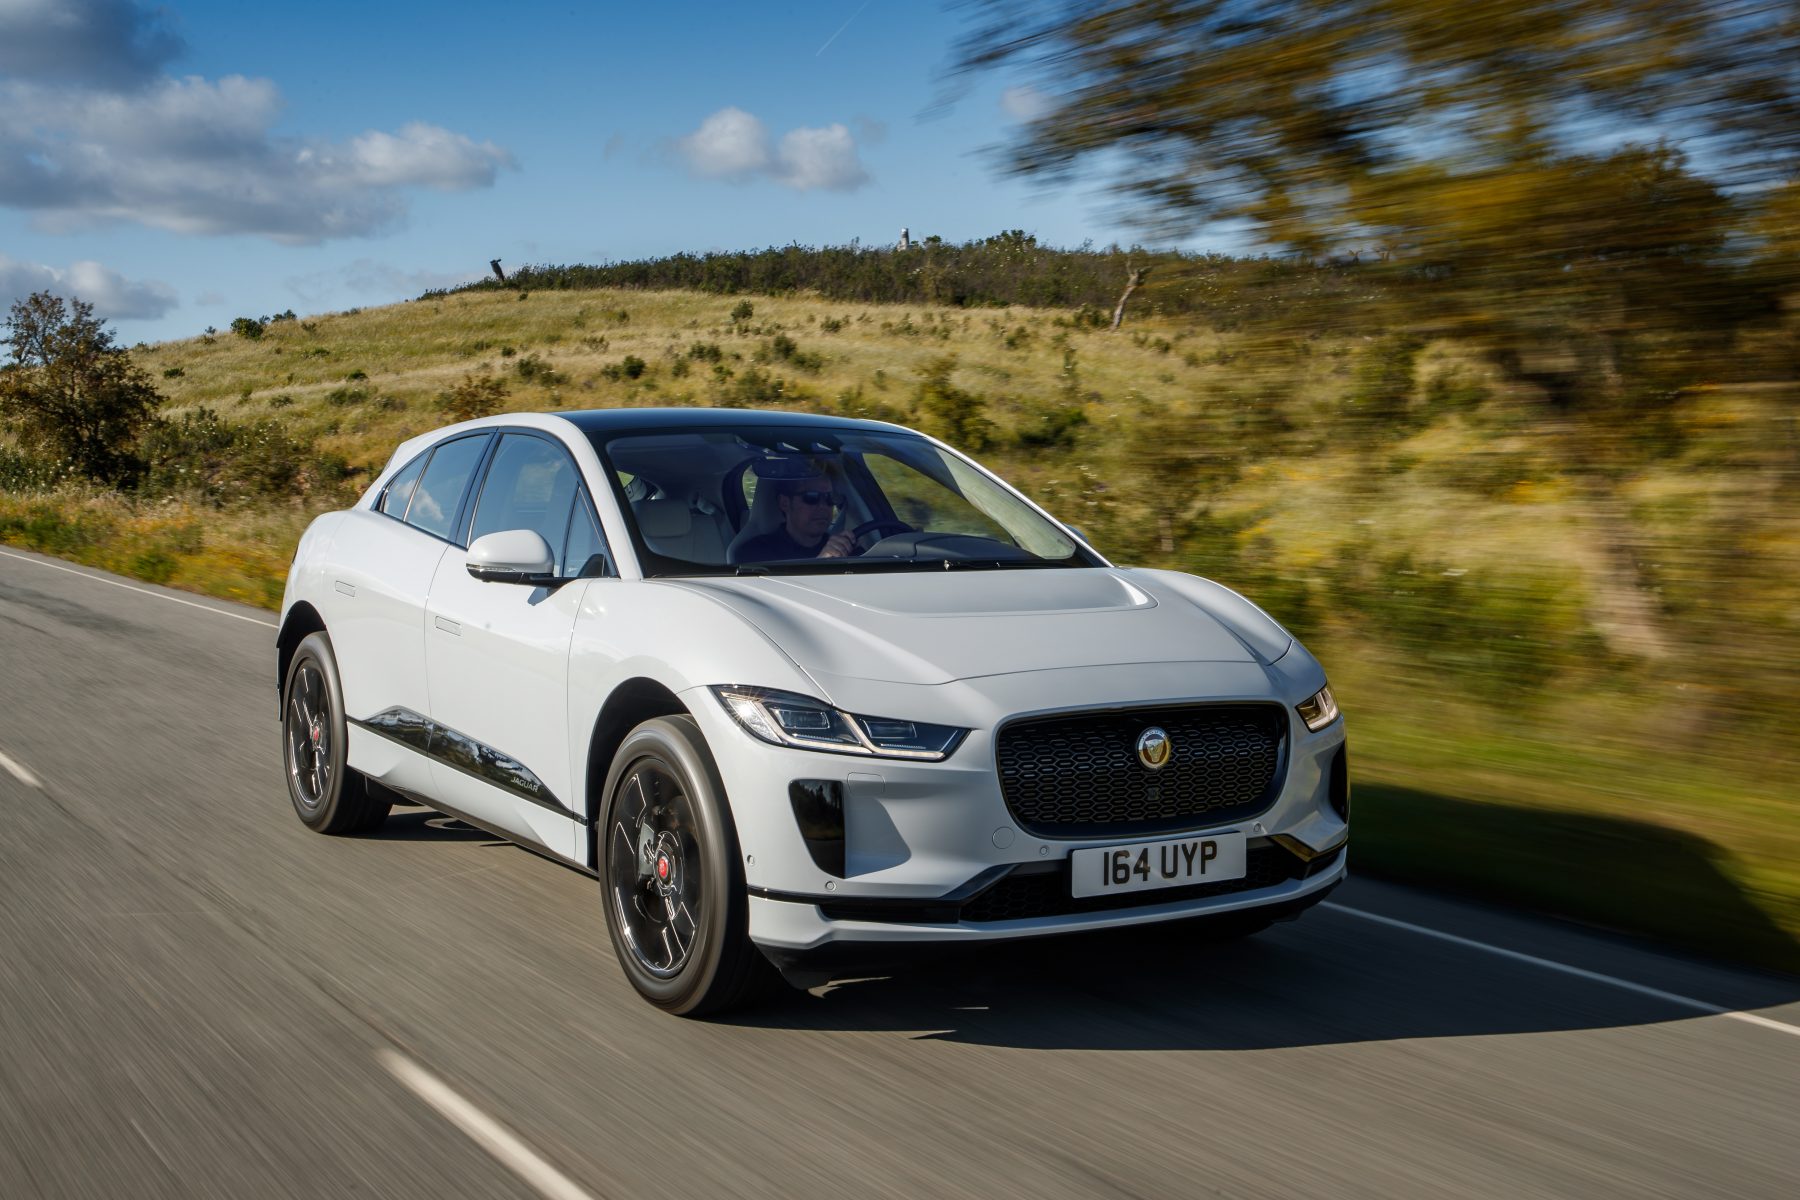 Is the 2019 Jaguar I-Pace The Best Looking Electric Car Yet? Video - The Fast Lane Car